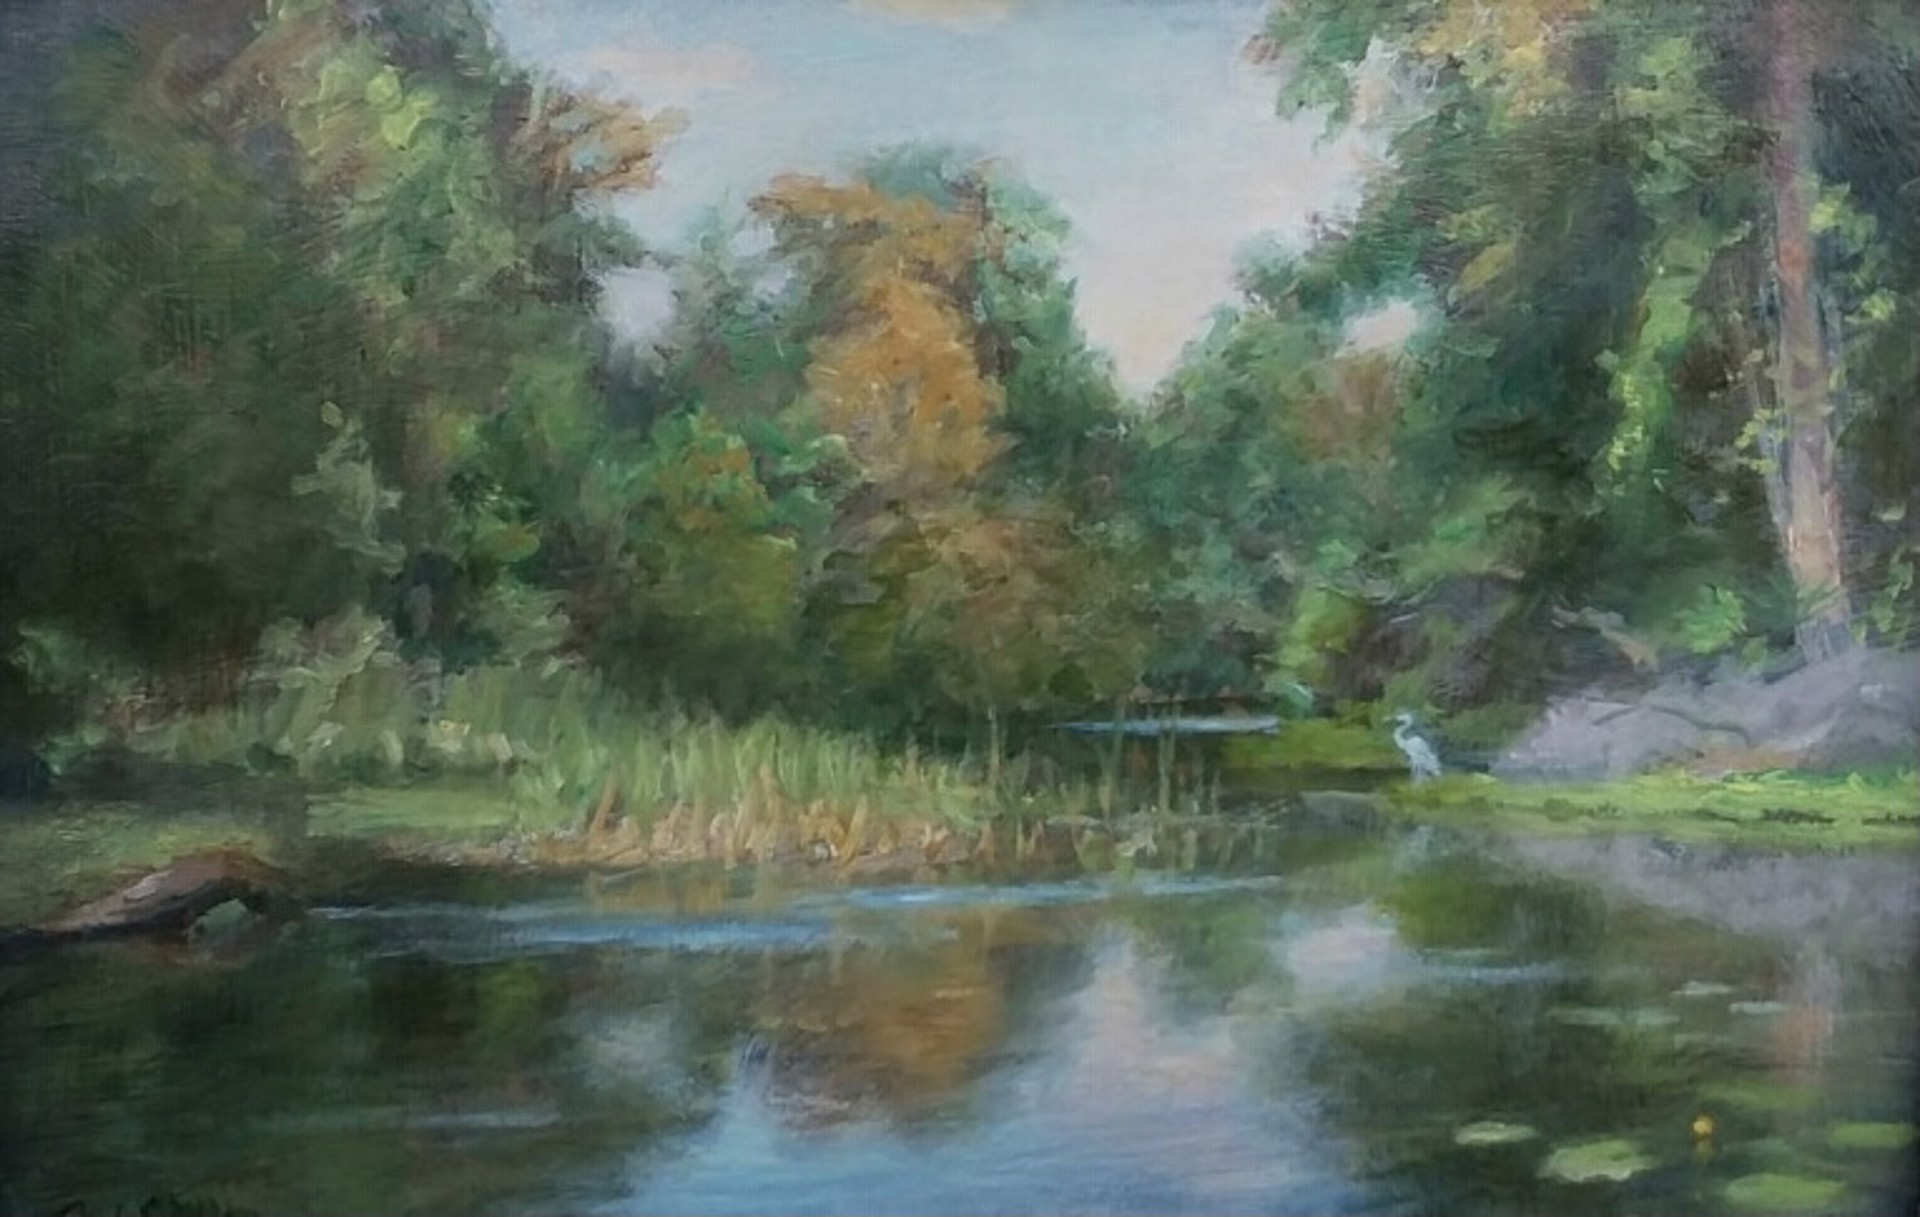 Home of the Heron - SOLD by Tom Sadler